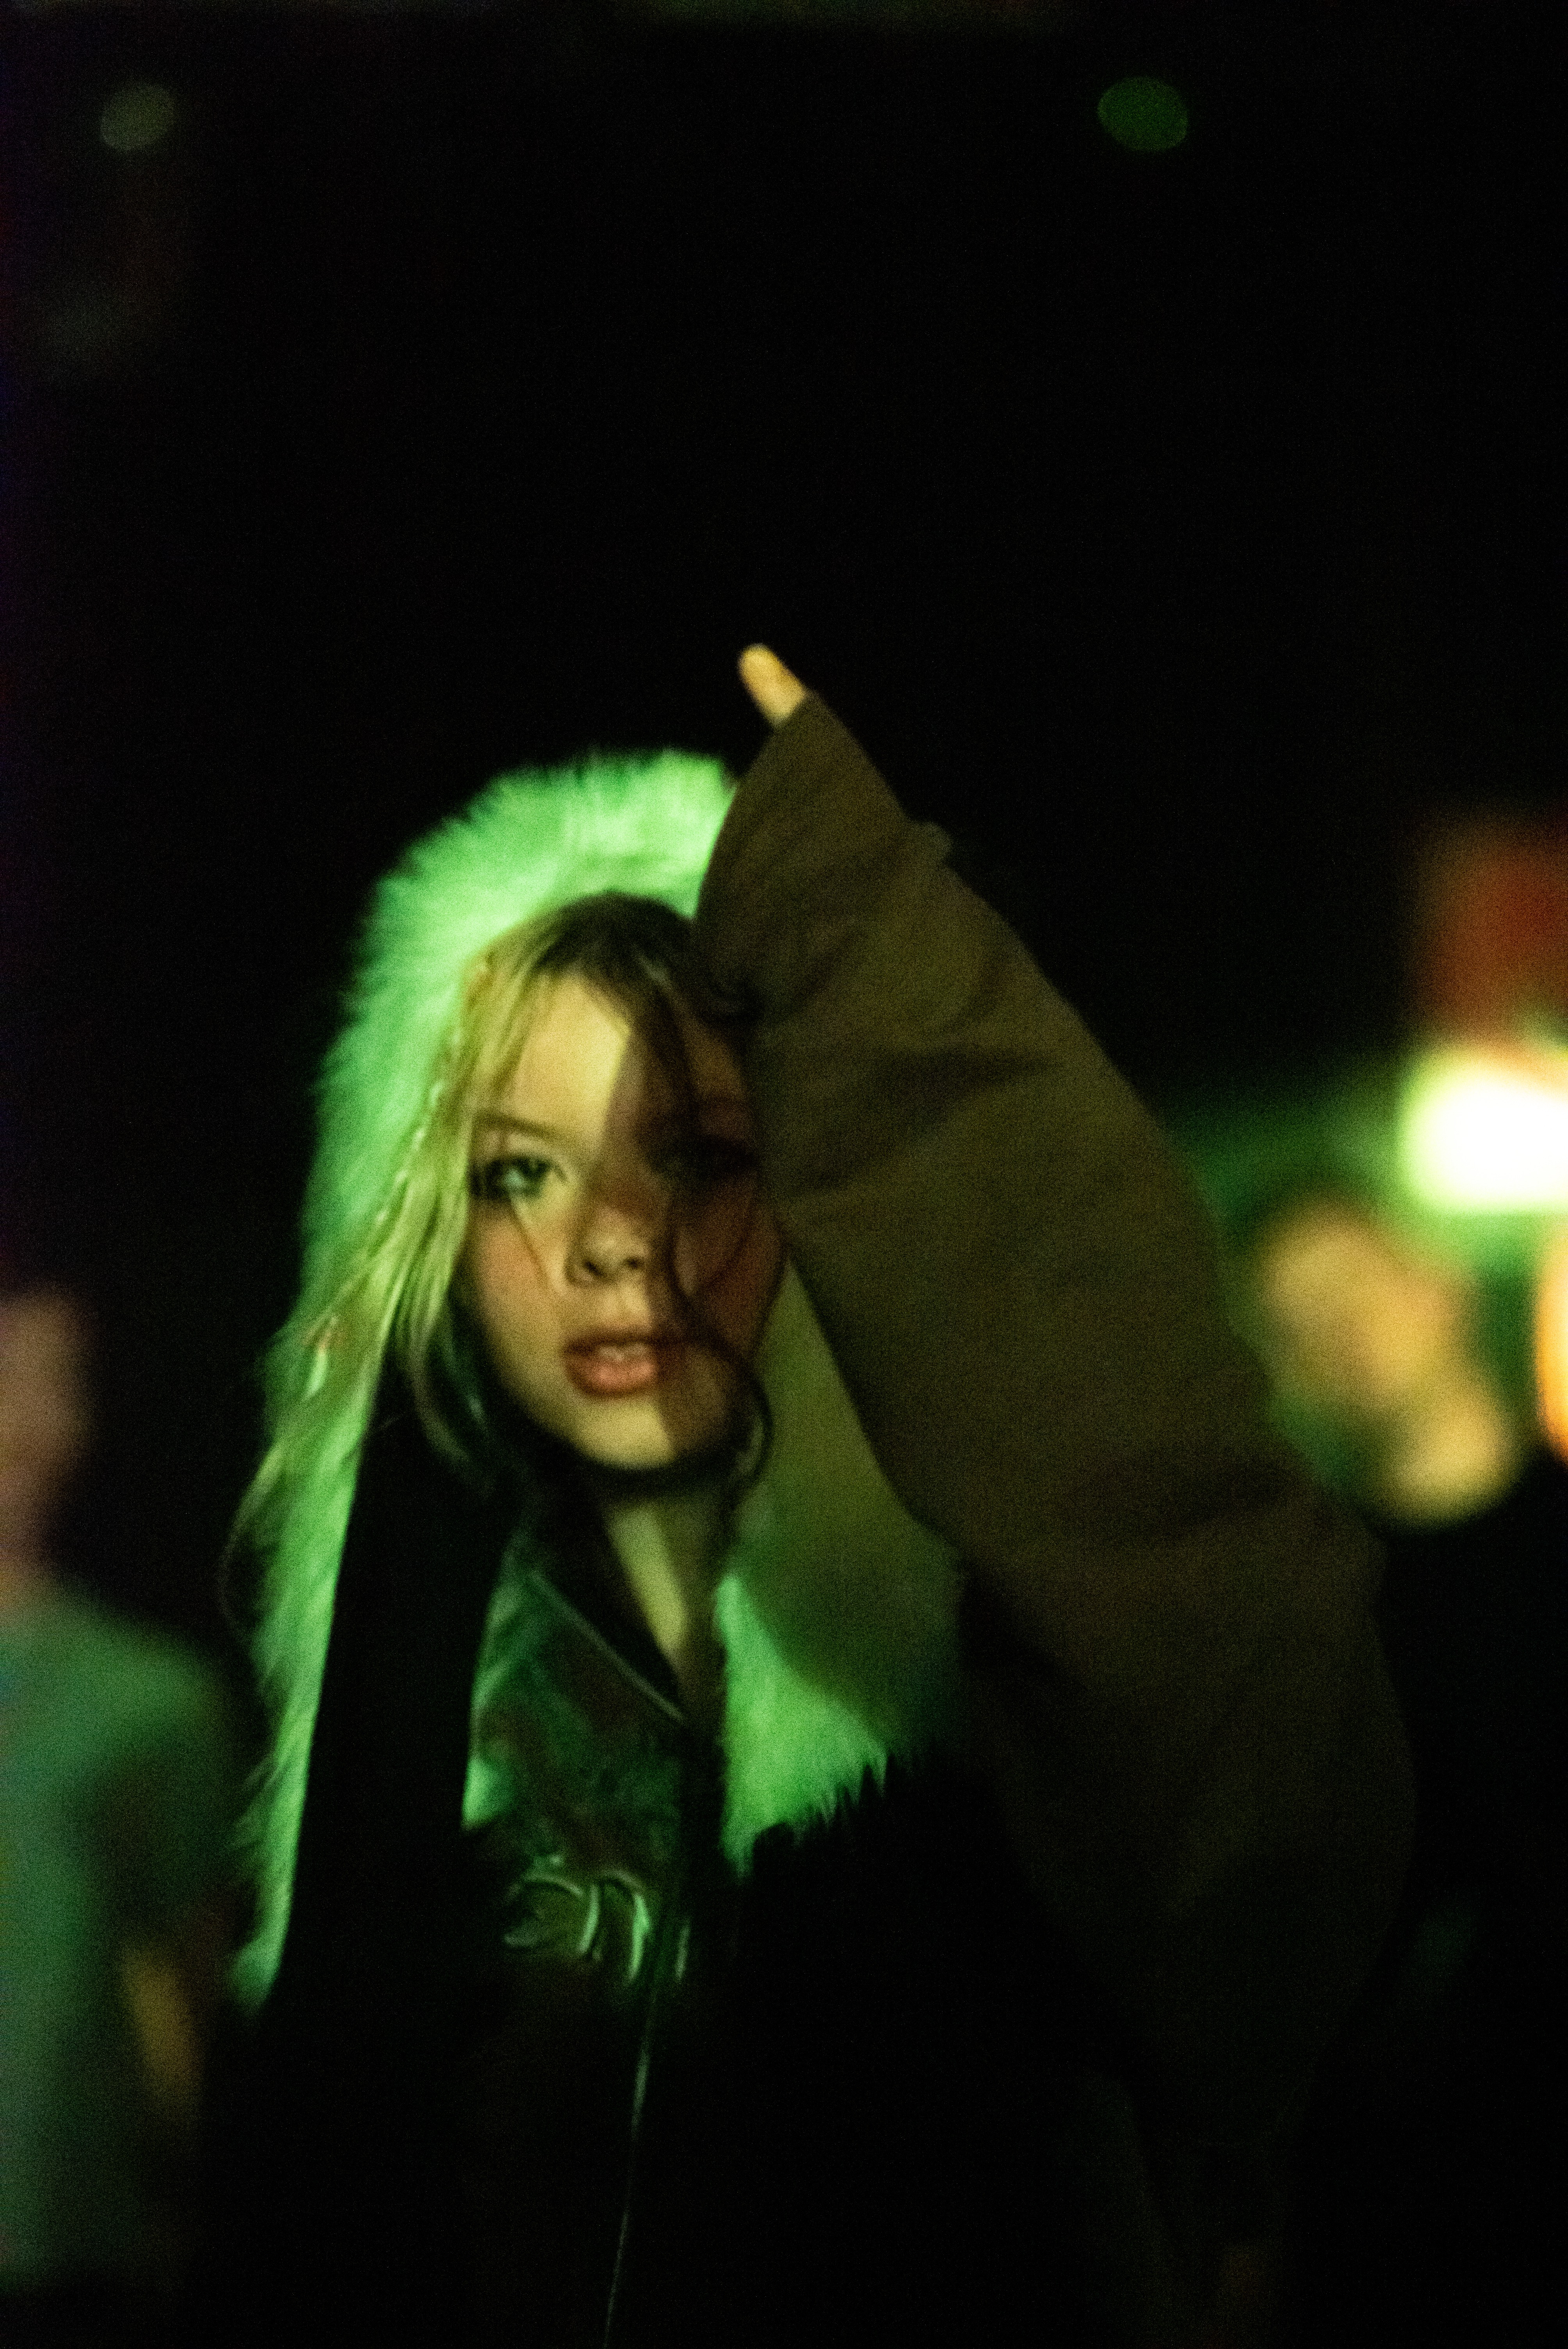 Girl in a furry hood and a dark coat puts her finger up standing in a crowd.